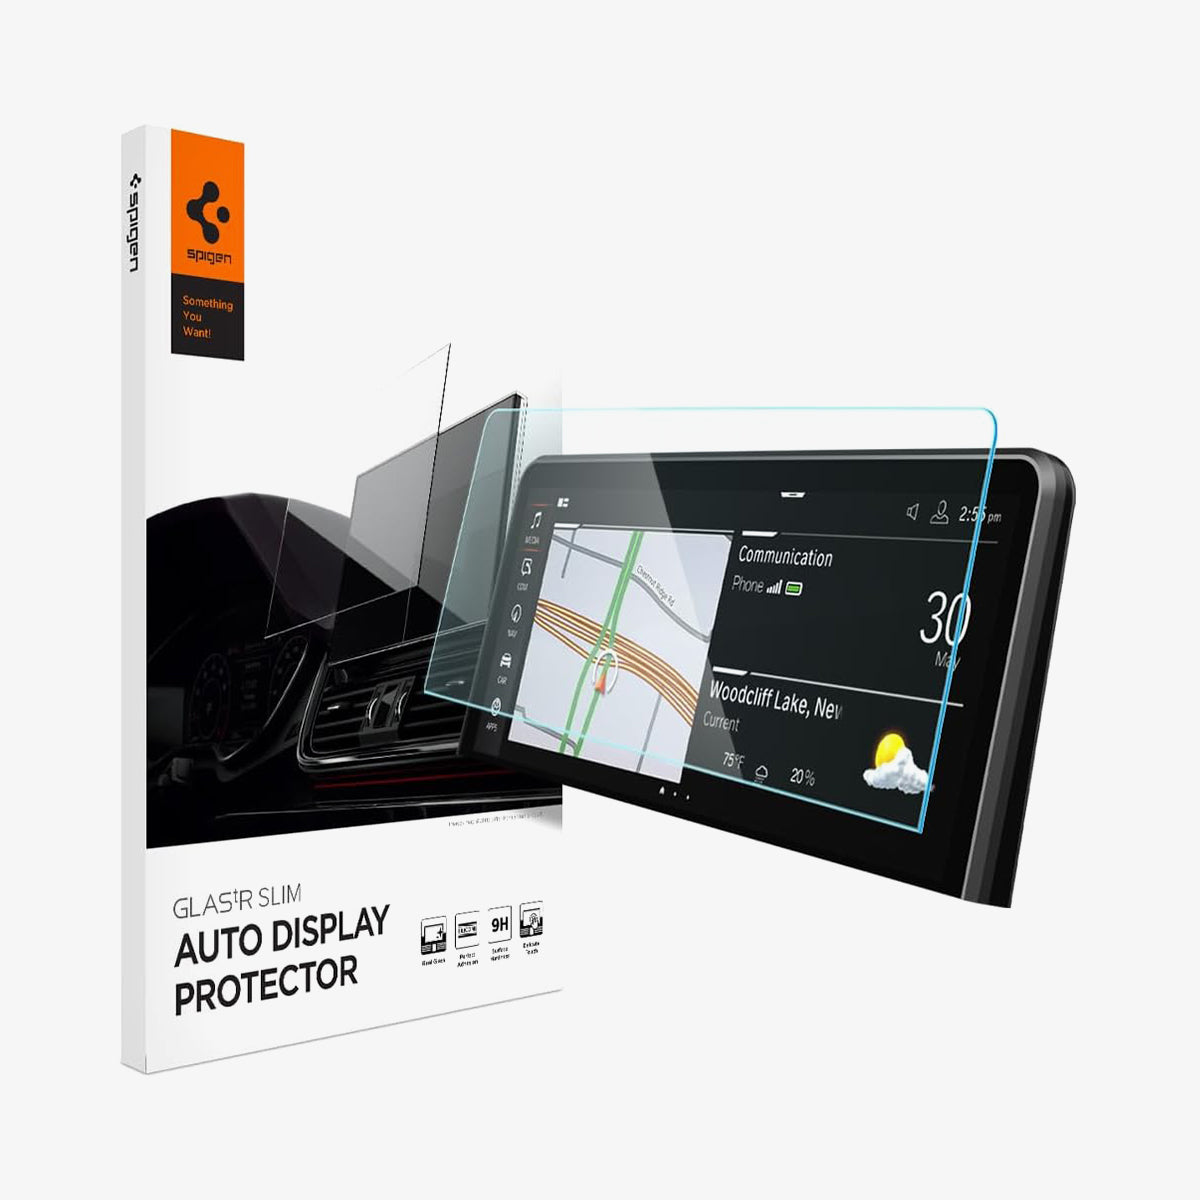 AGL06850 - BMW X3 / X4 Screen Protector GLAS.tR SLIM Anti-Glare showing the touch screen display, screen protector and packaging